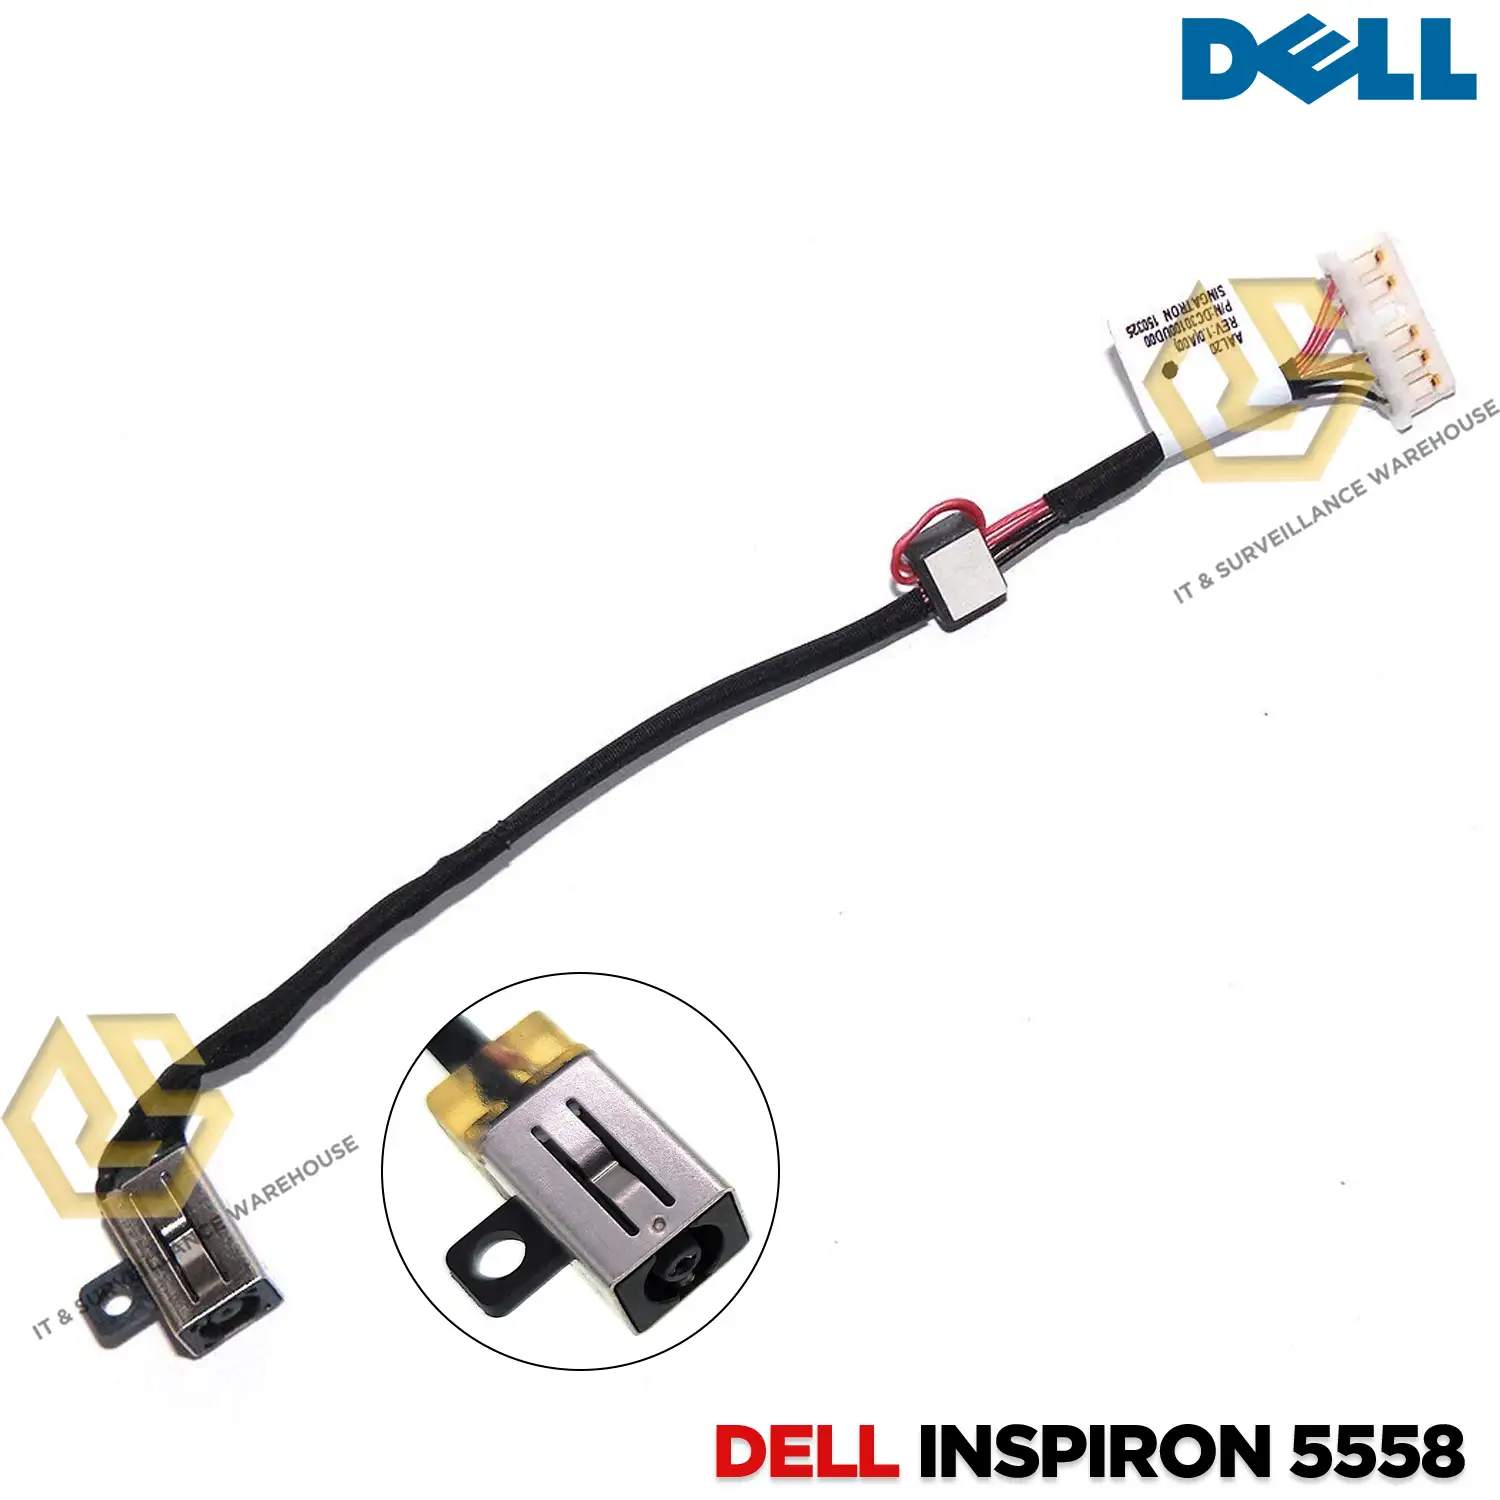 LAPTOP DC JACK FOR DELL INSPIRON 5558 | 5559 | 3558 | 15-5000